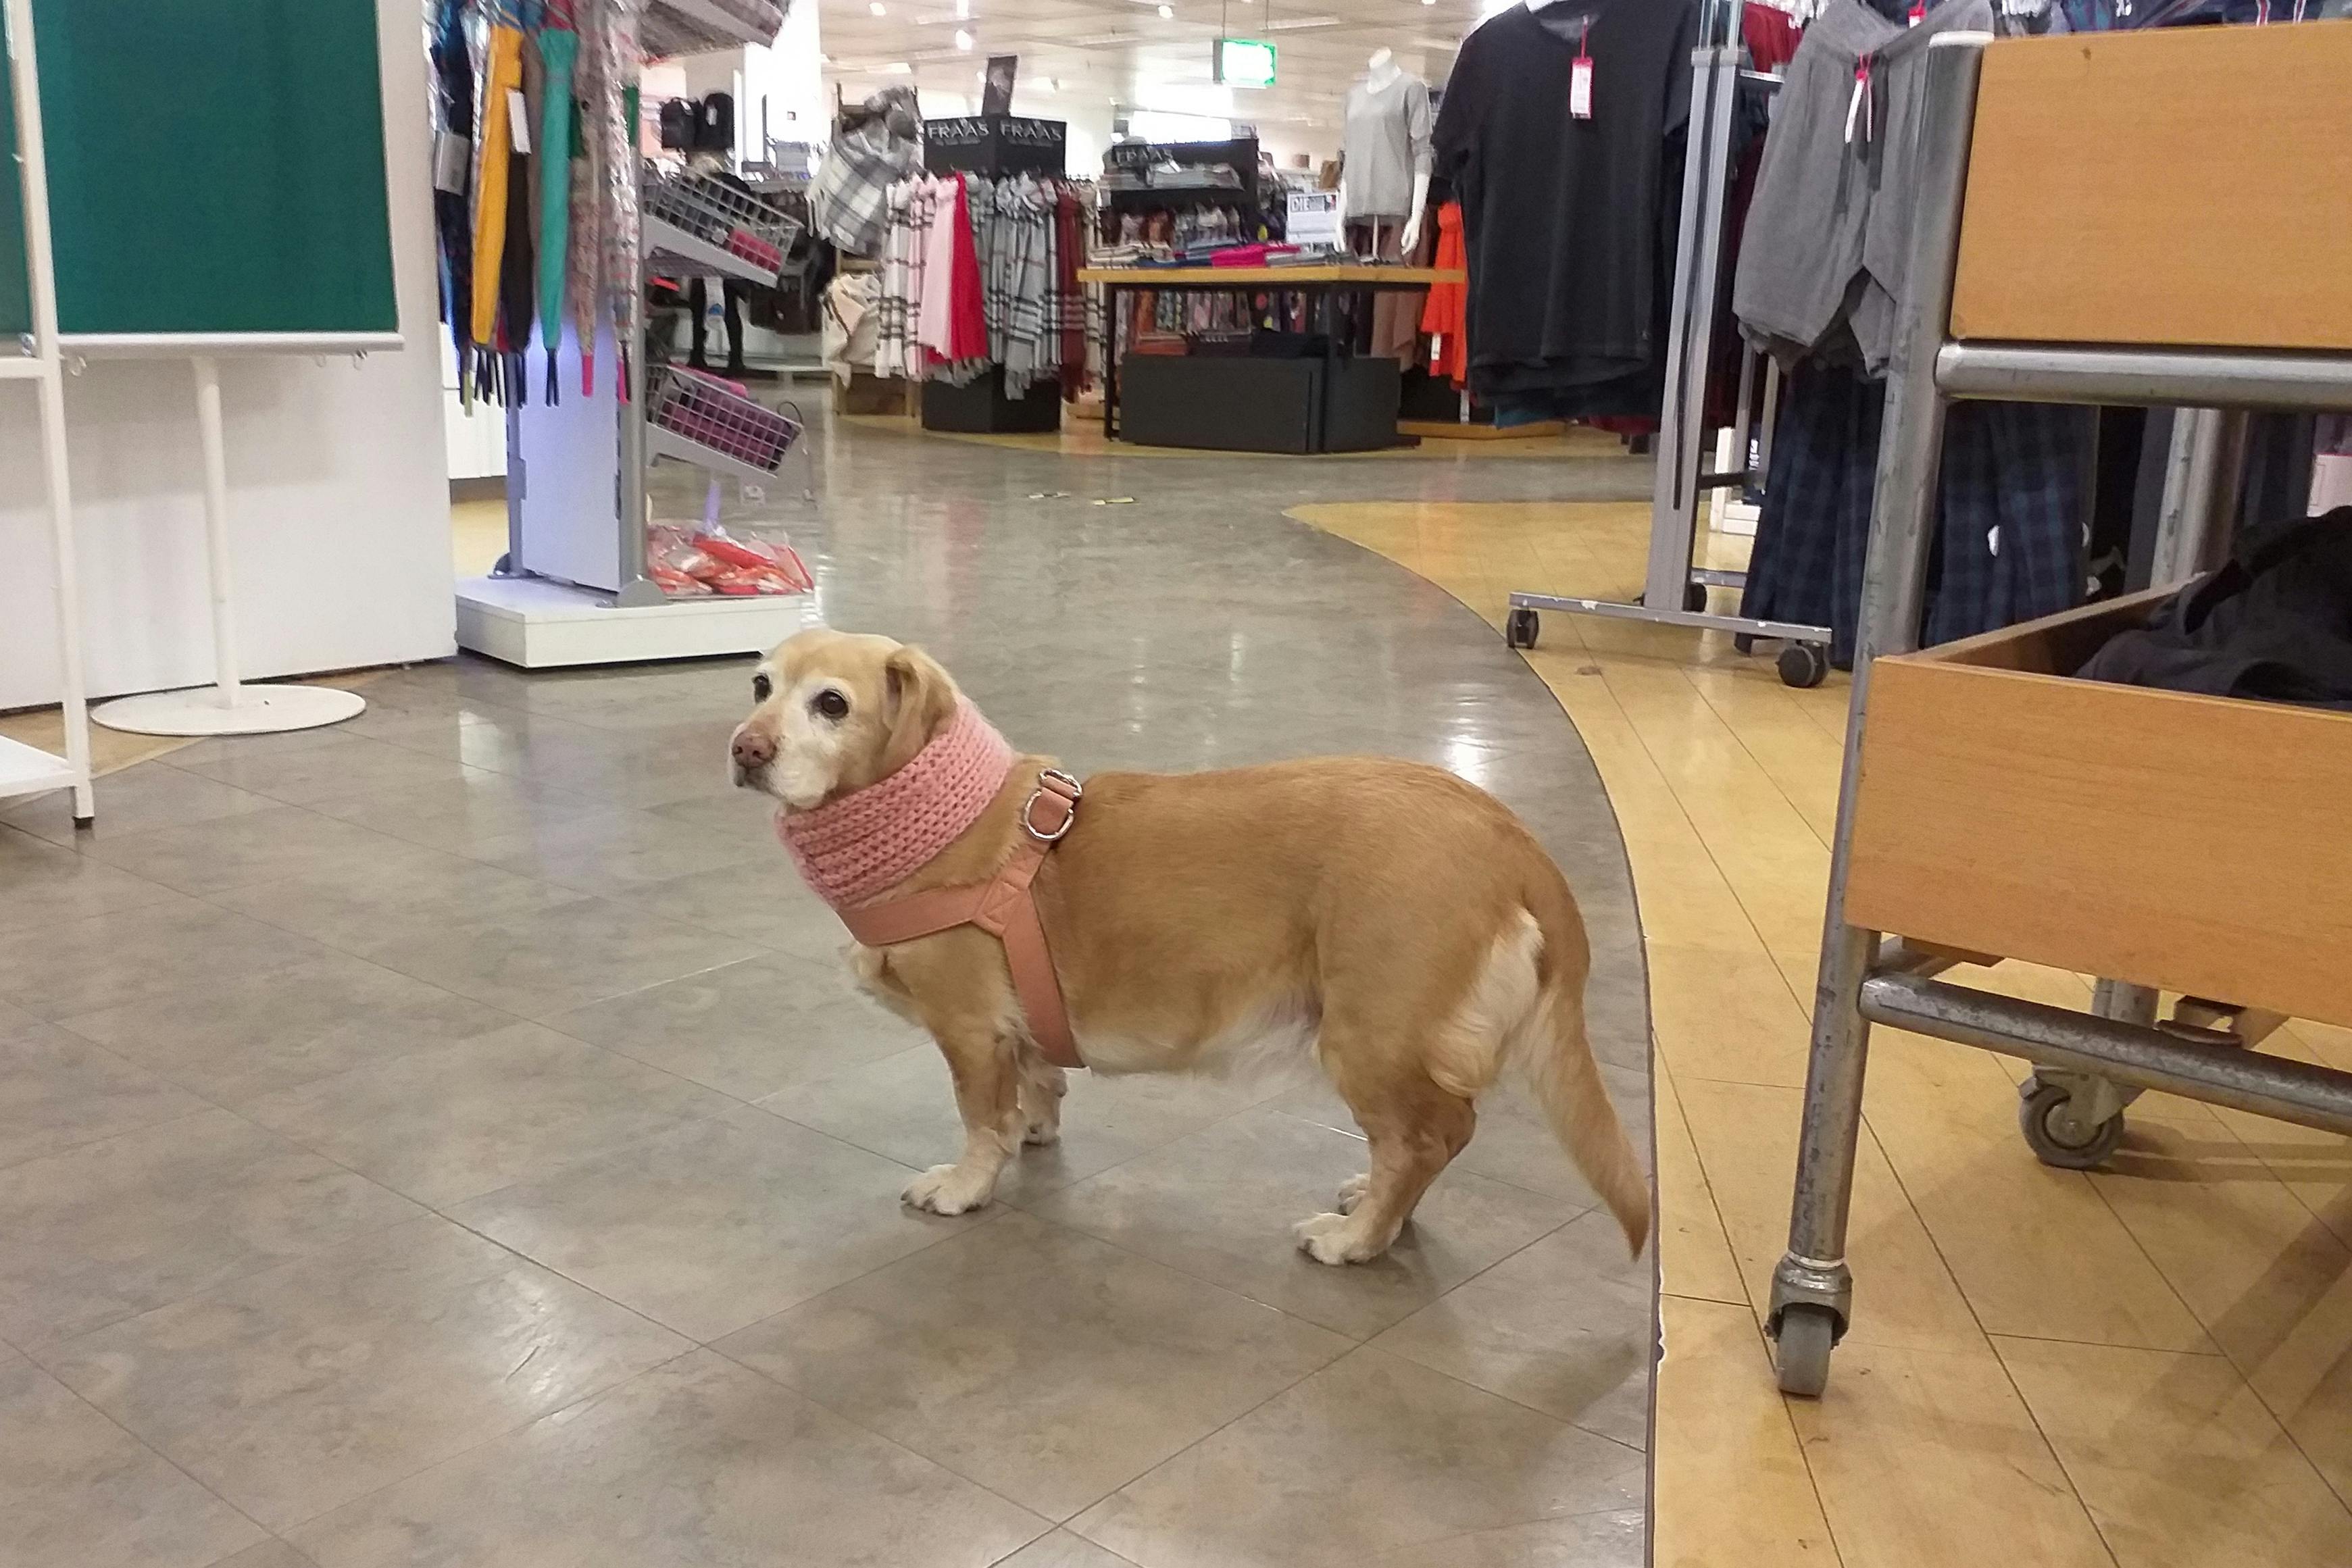 A dog in a pink sweater and harness inside a clothing store. 